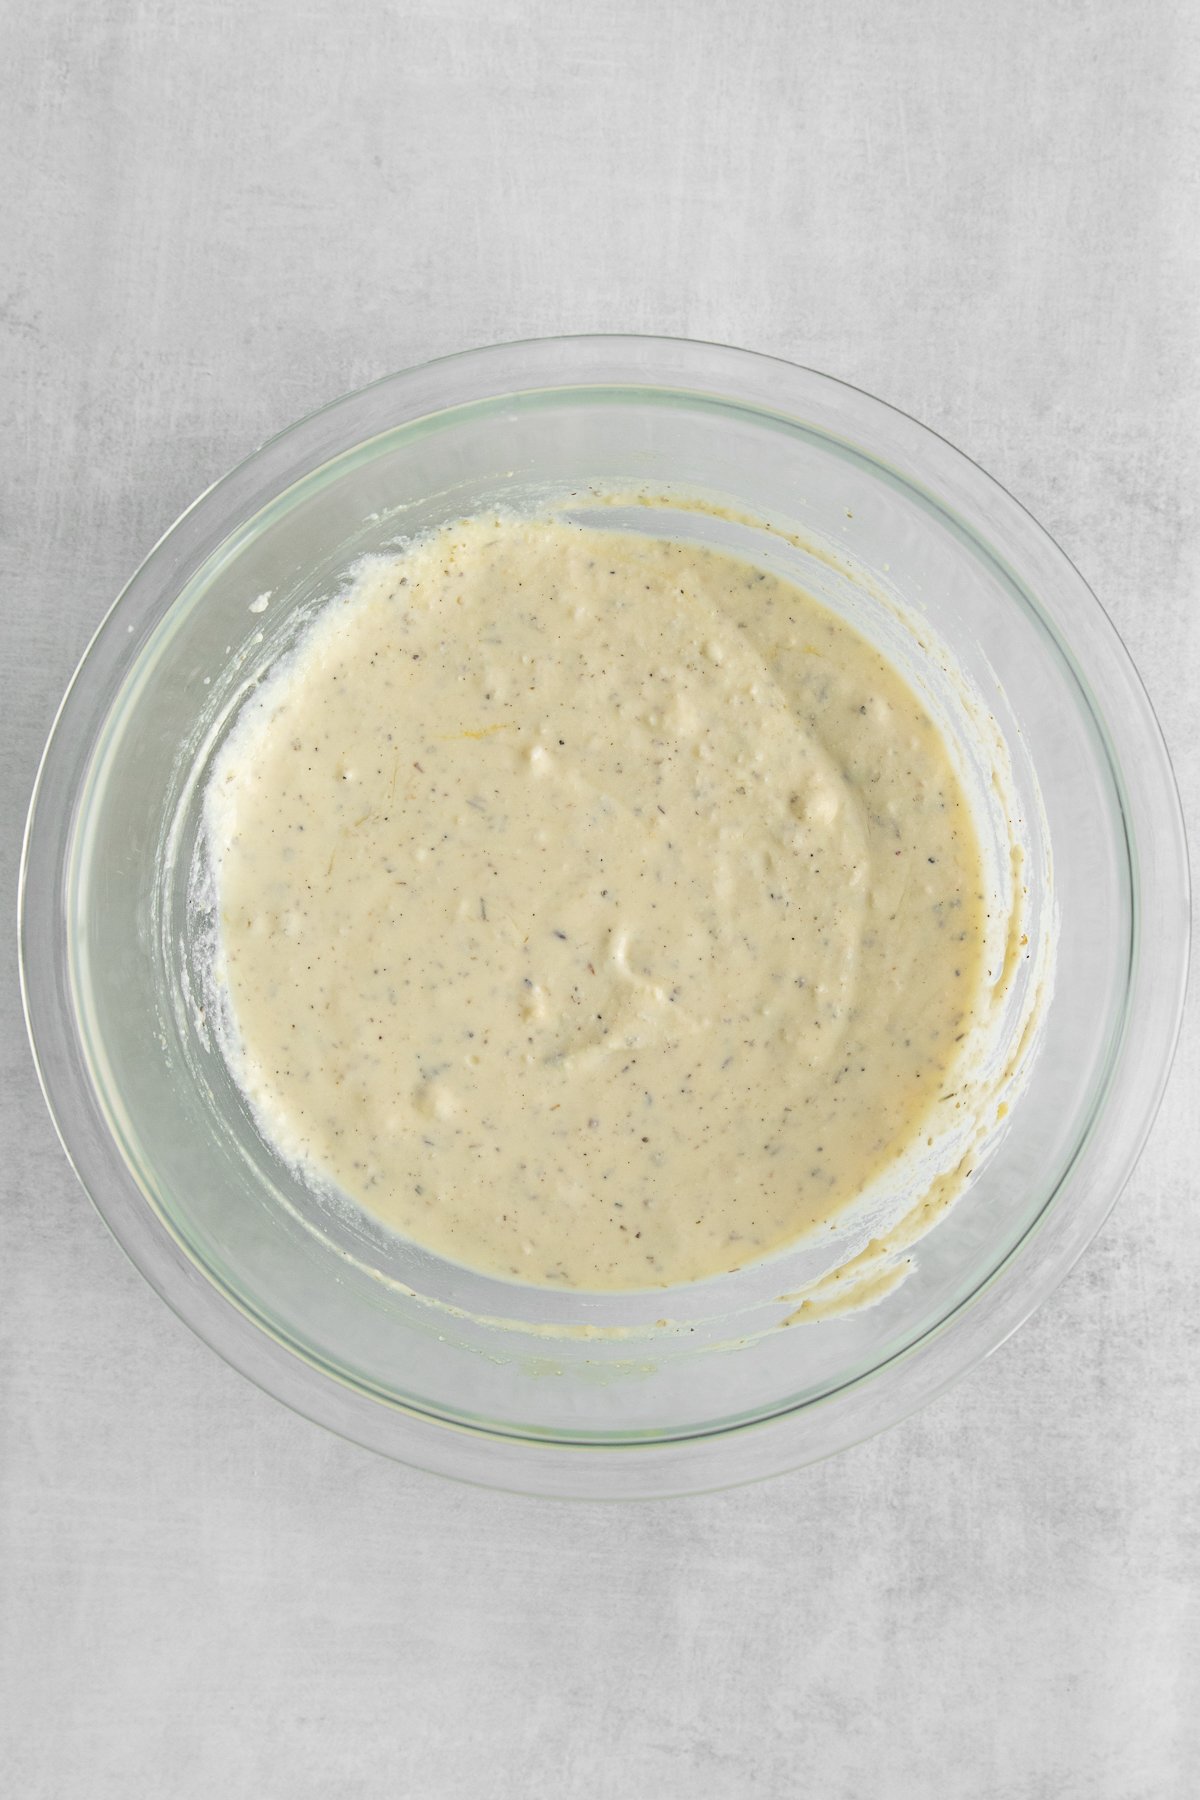 cheese mixture in bowl.